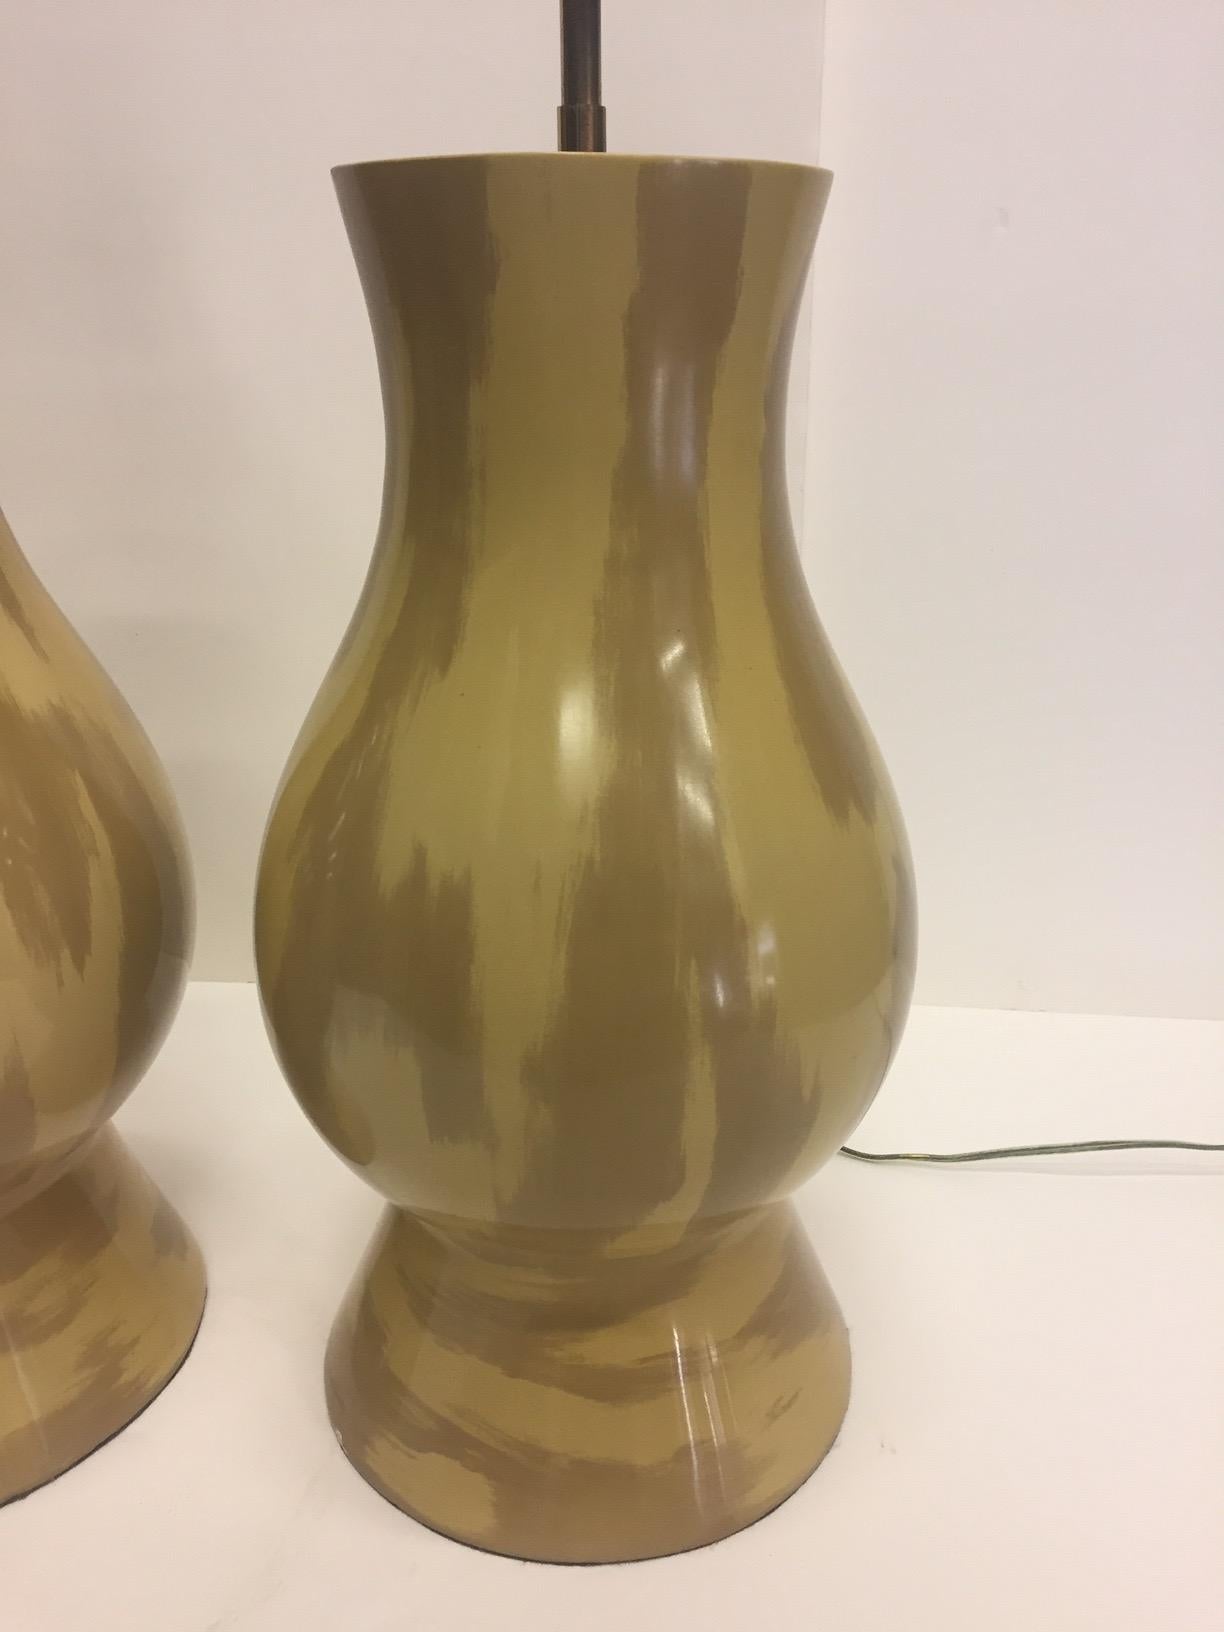 North American Rare Collectible Pair of Karl Springer Mustard and Khaki Ceramic Lamps For Sale